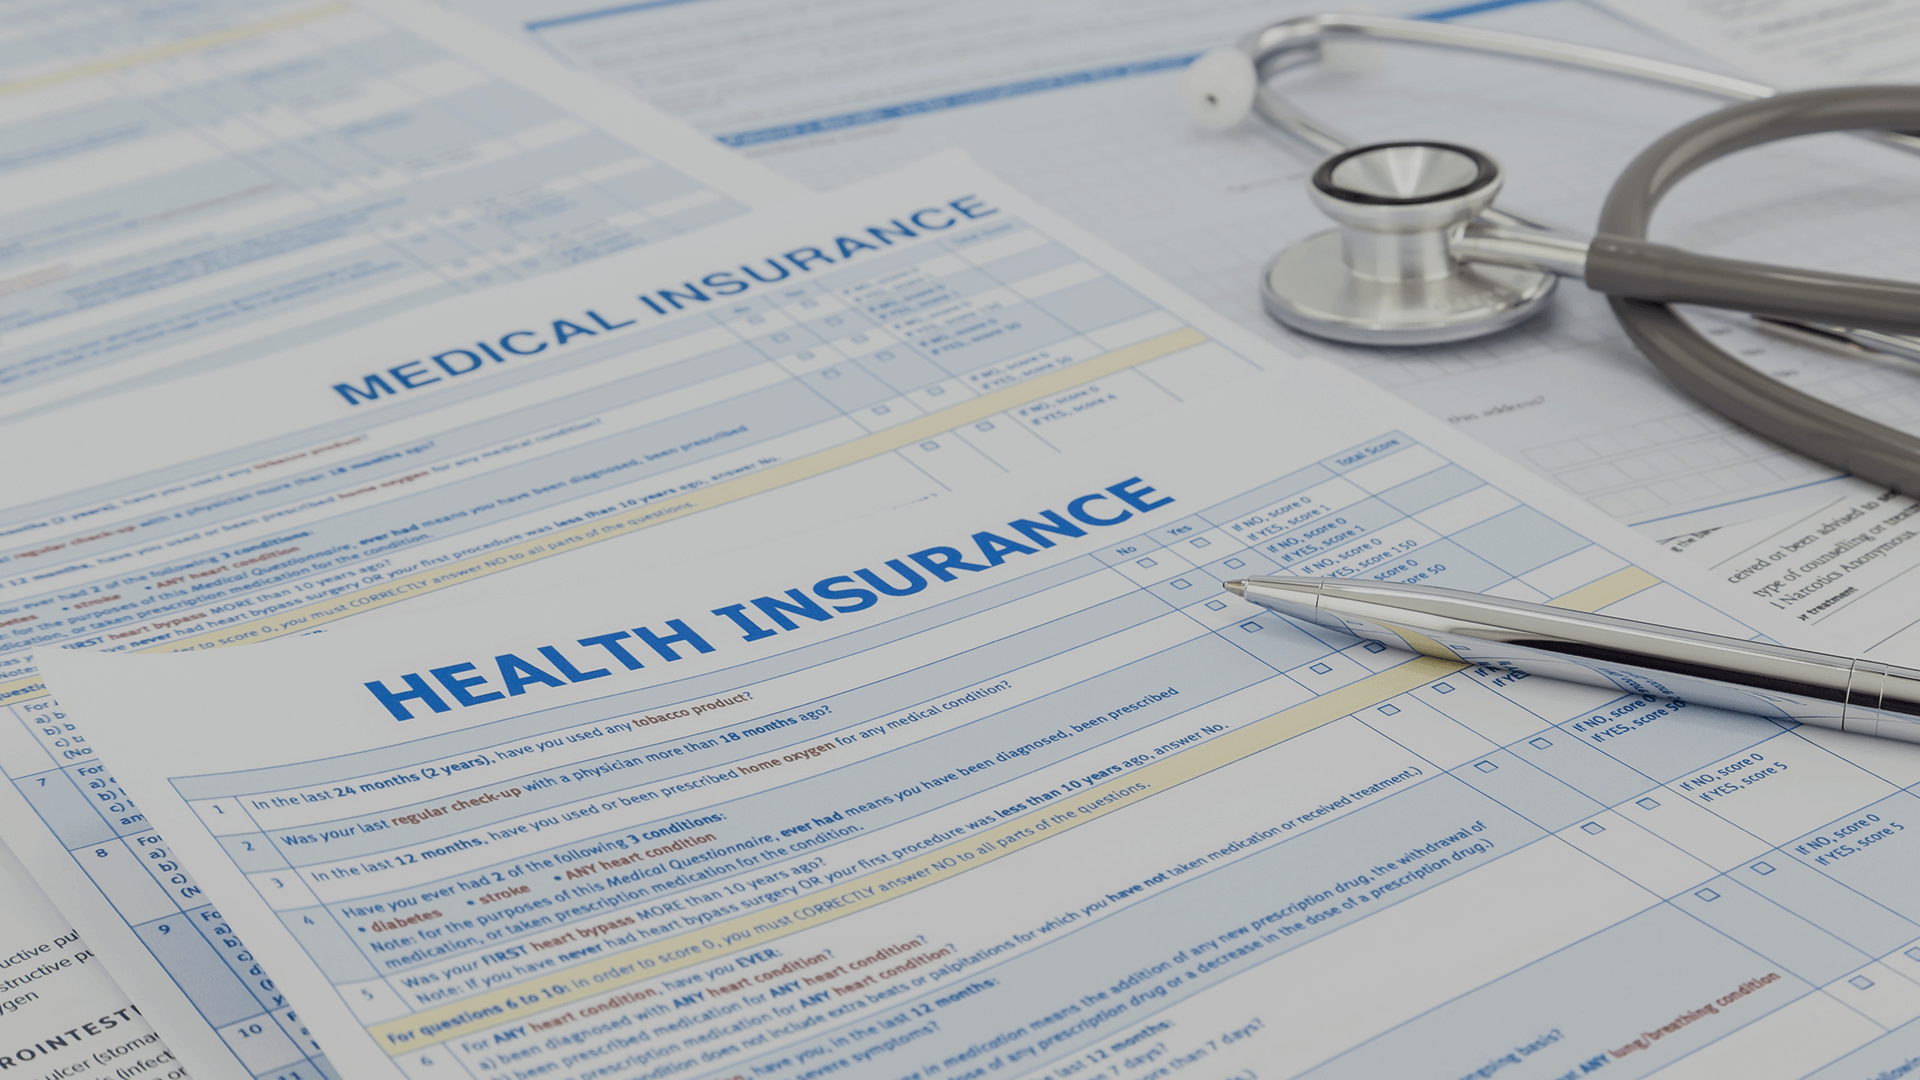 Essential Guide: 10 Things To Know While Buying Health Insurance